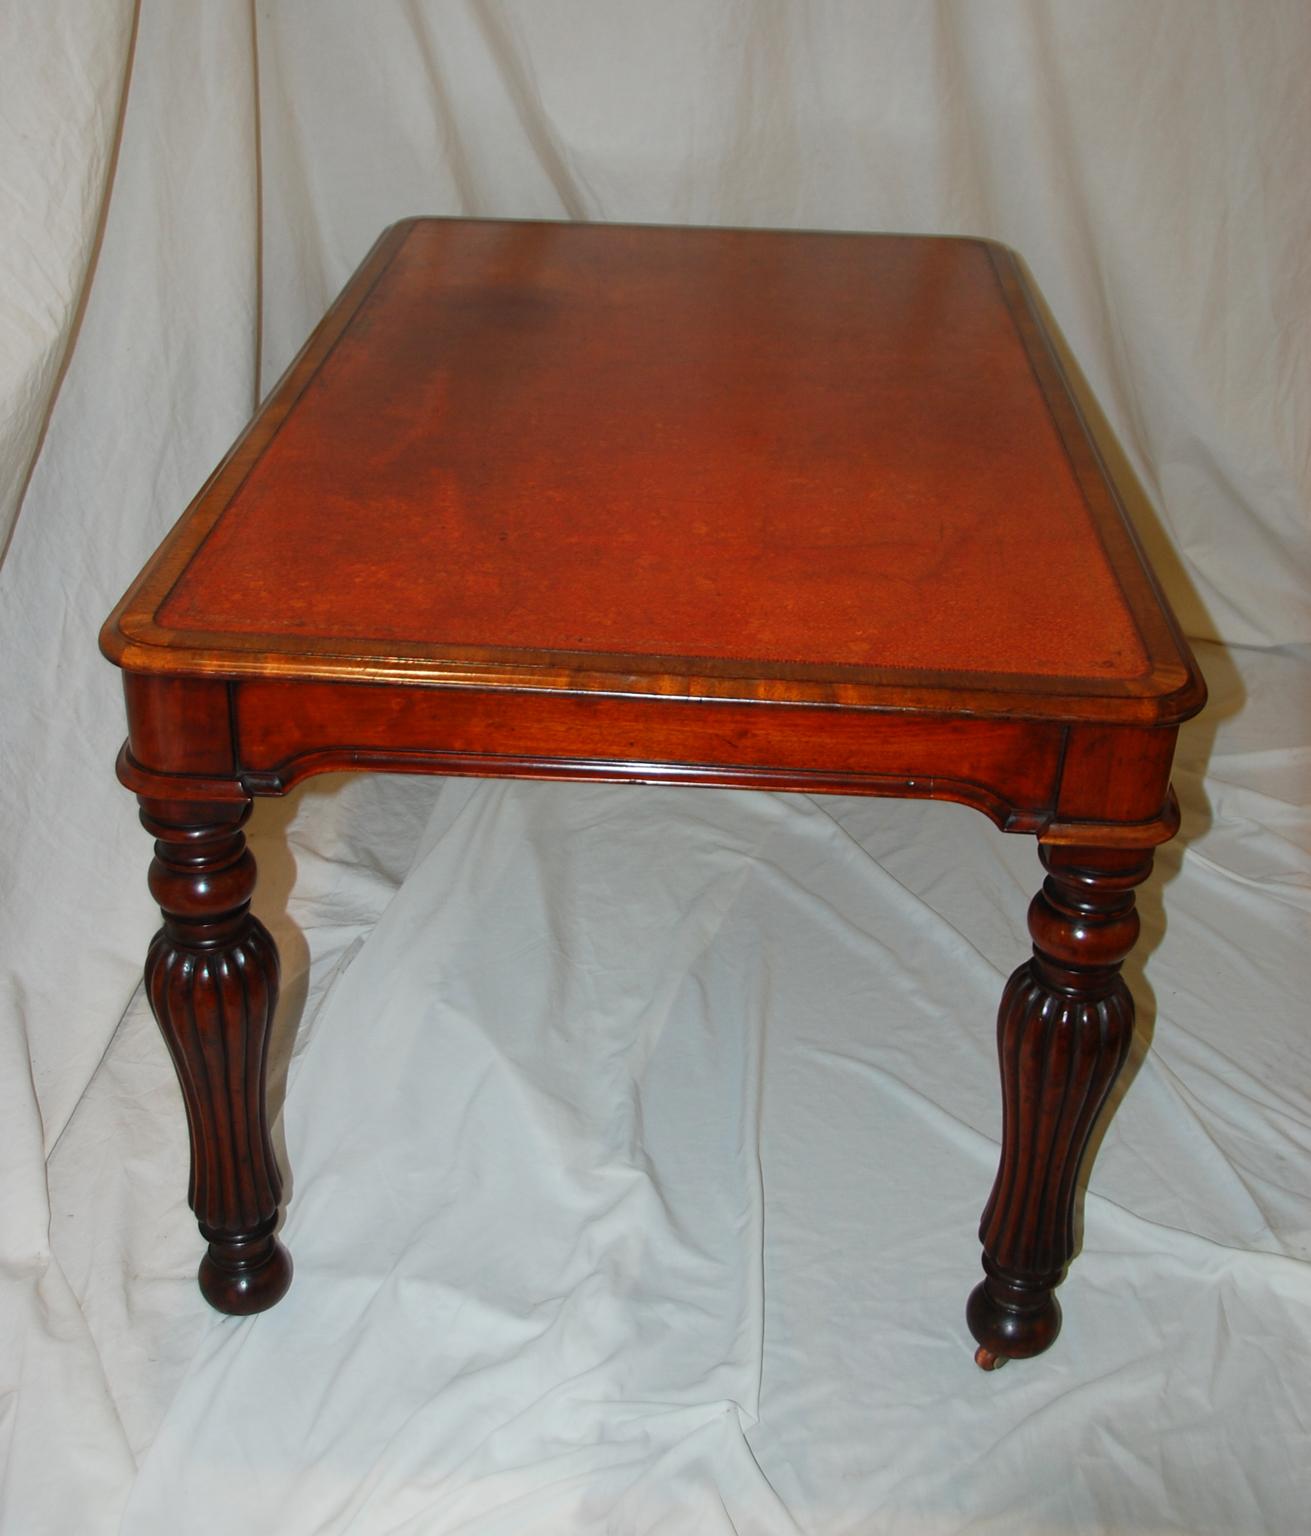 English William IV period mahogany writing table with inset gold tooled old leather writing surface, turned and reeded shaped legs, molded curved skirt to all sides. This medium sized writing table exudes the stylishness of William IV without being